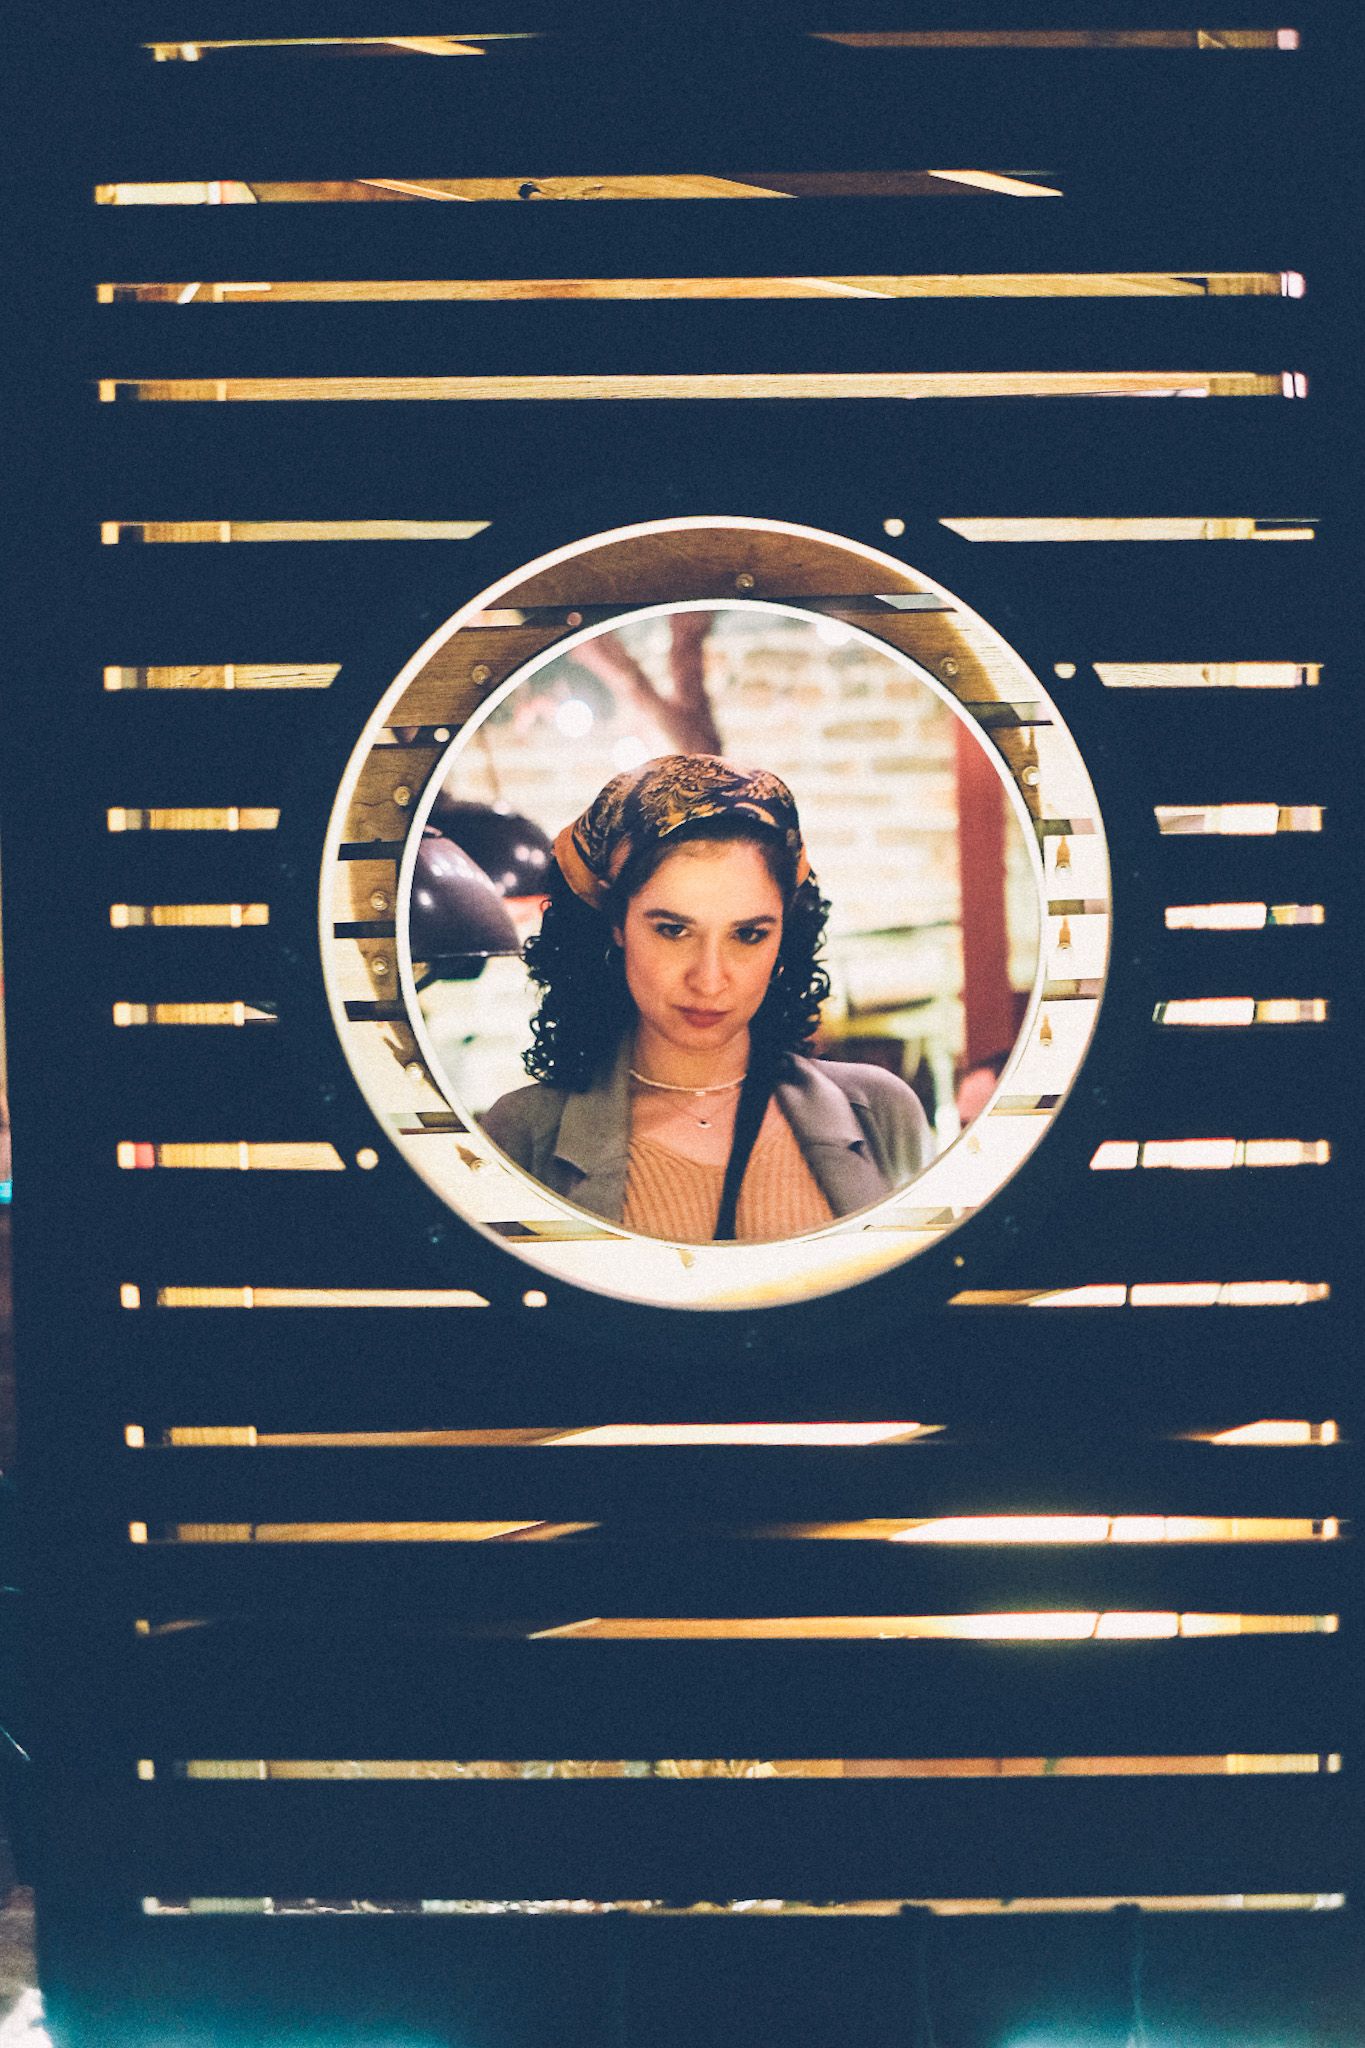 A woman with curly dark hair wearing a bandana looks through a circular cutout in a slatted wood panel, at night in backyard bar.